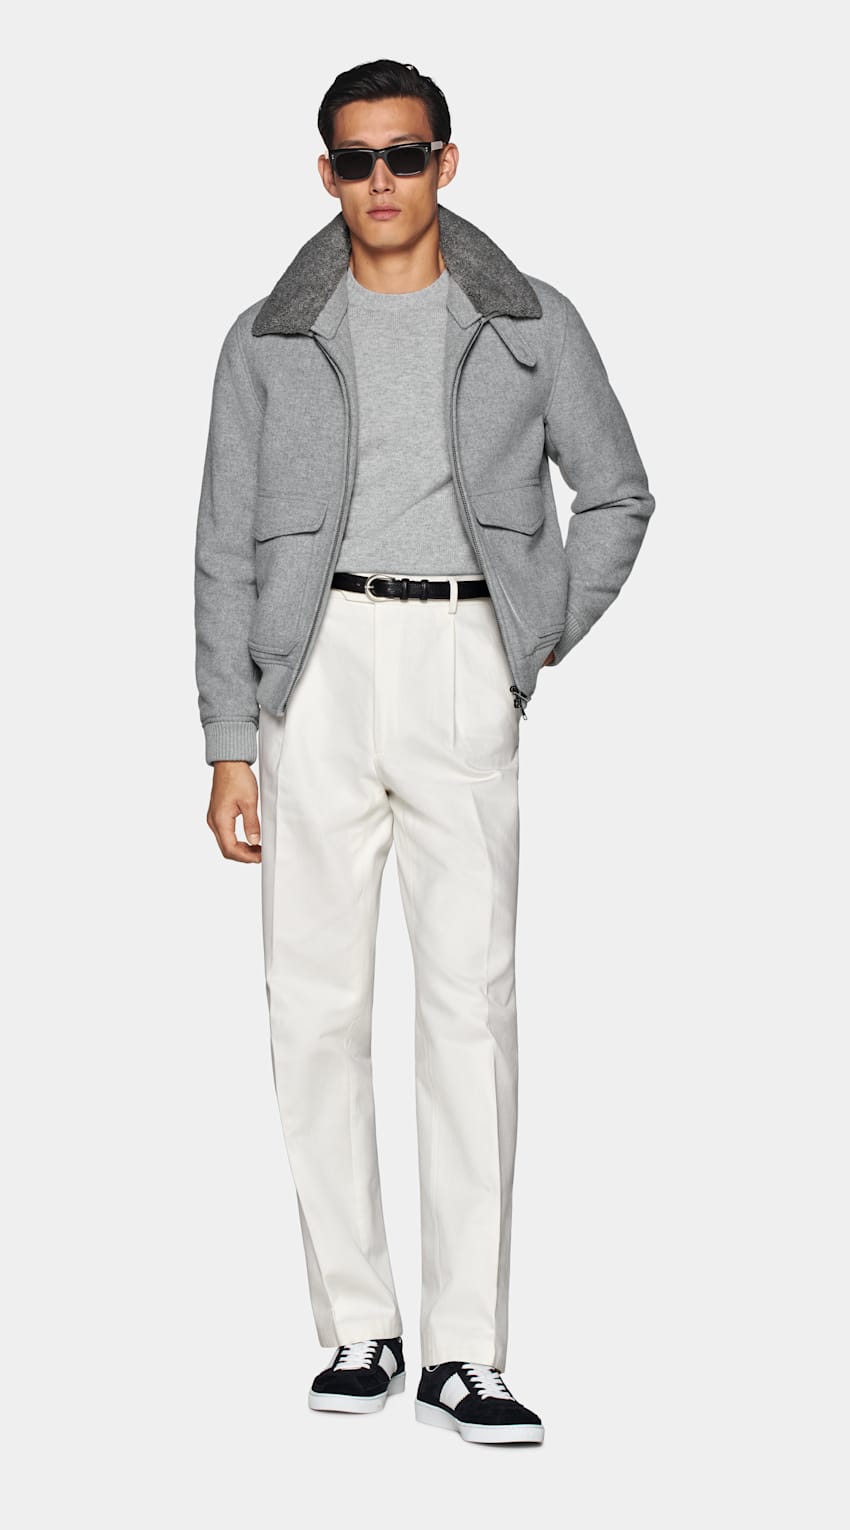 SUITSUPPLY Pure Wool Light Grey Bomber Jacket